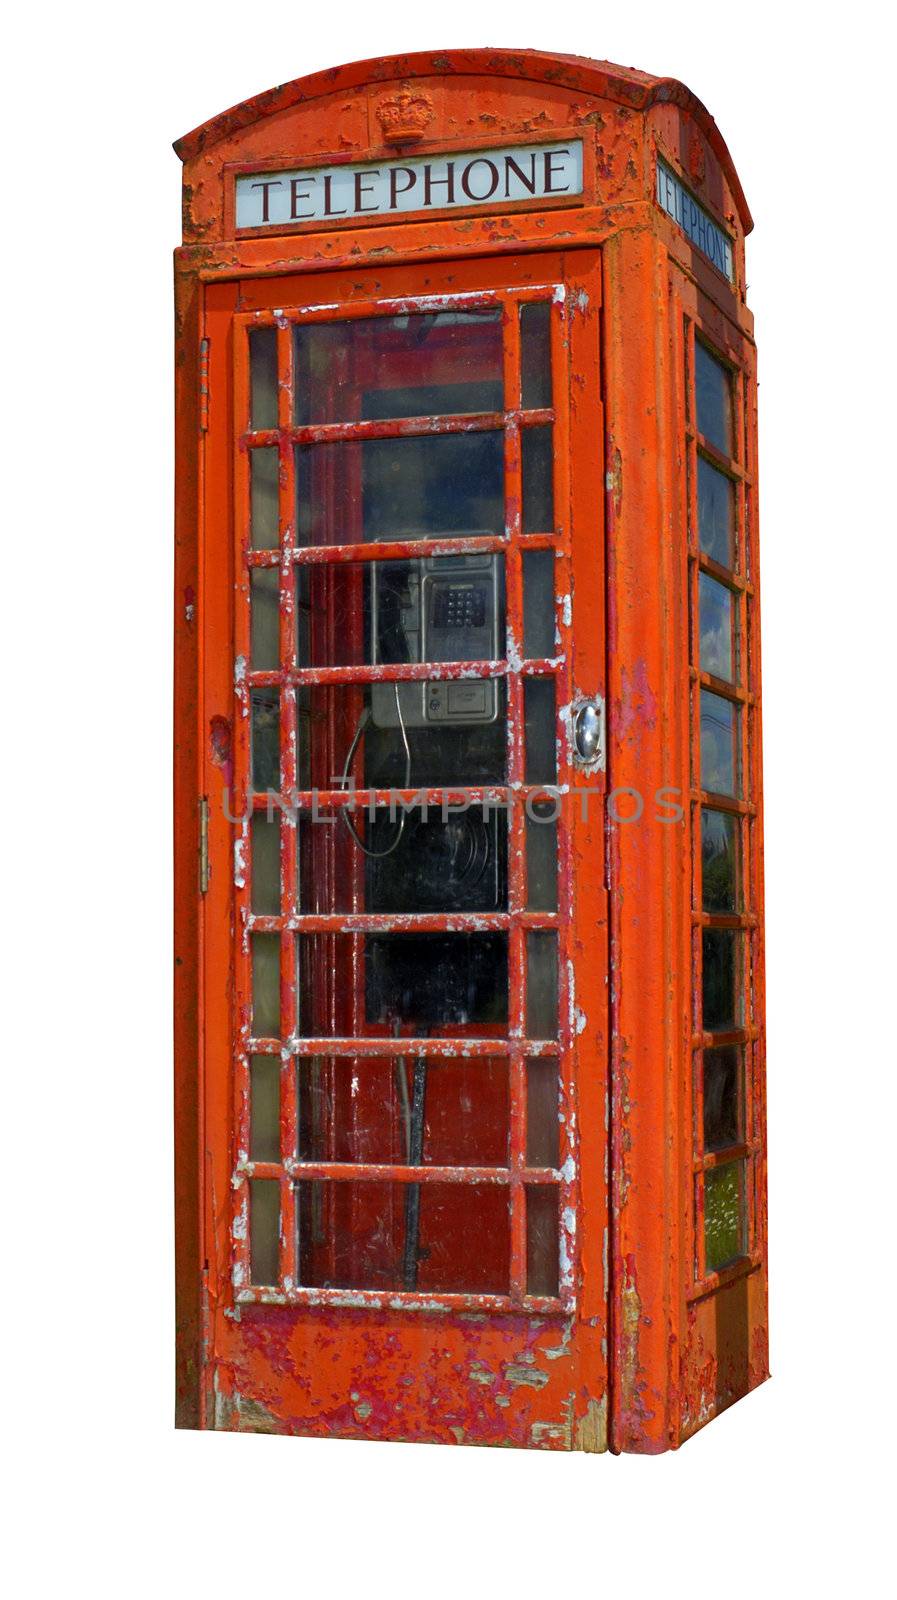 A grungy British telephone box, isolated on a whithe background.